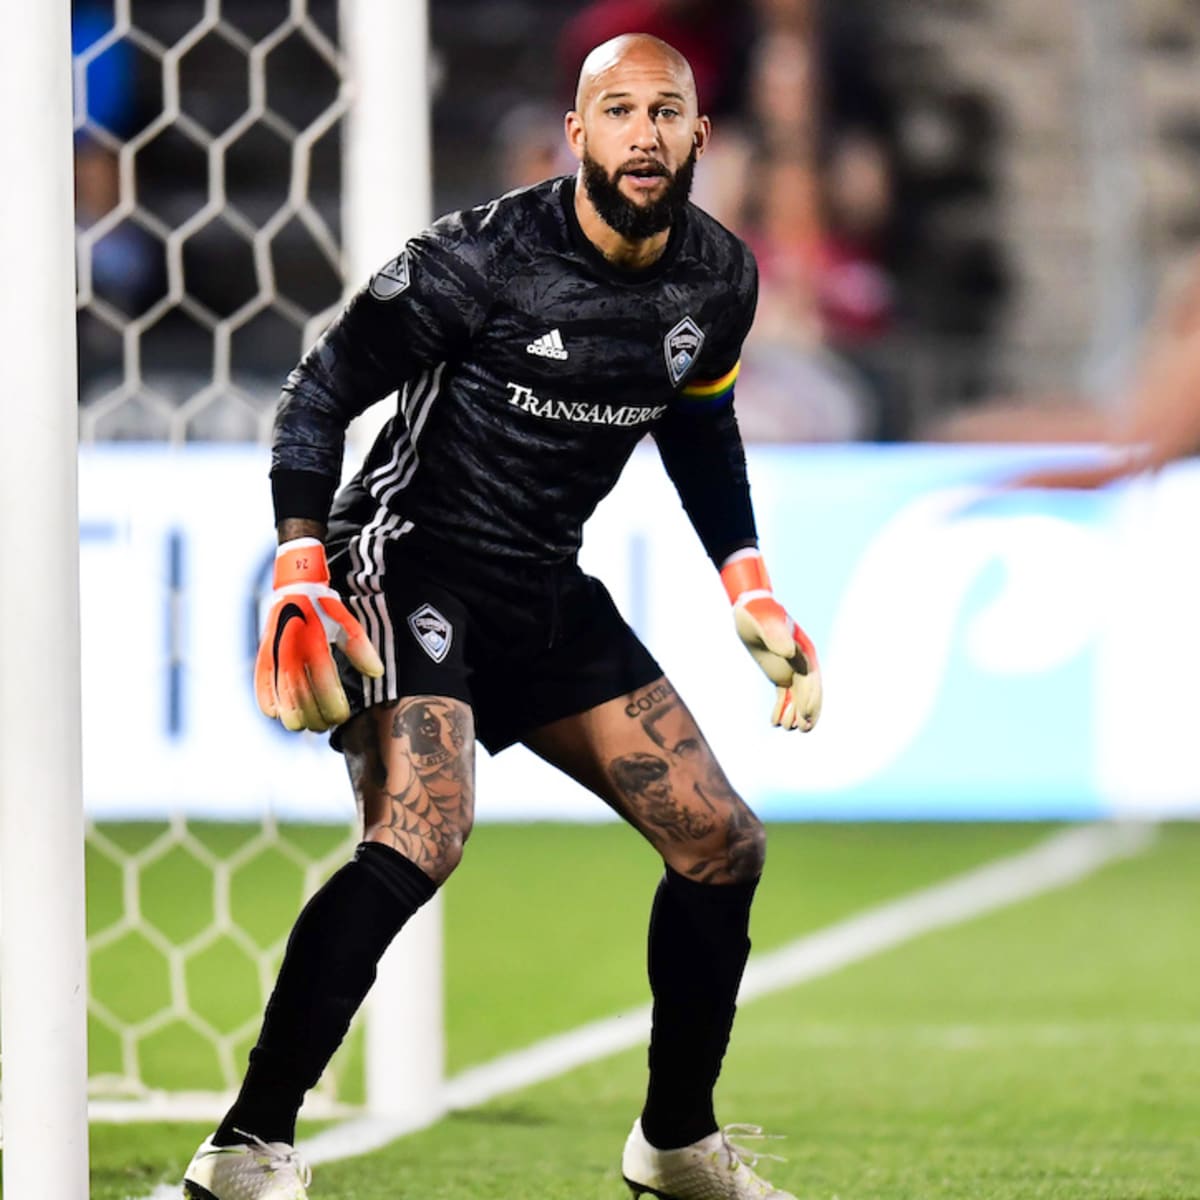 What's Next For Goalkeeper Tim Howard? - Kids: Sports News Kids, Kids Games and More